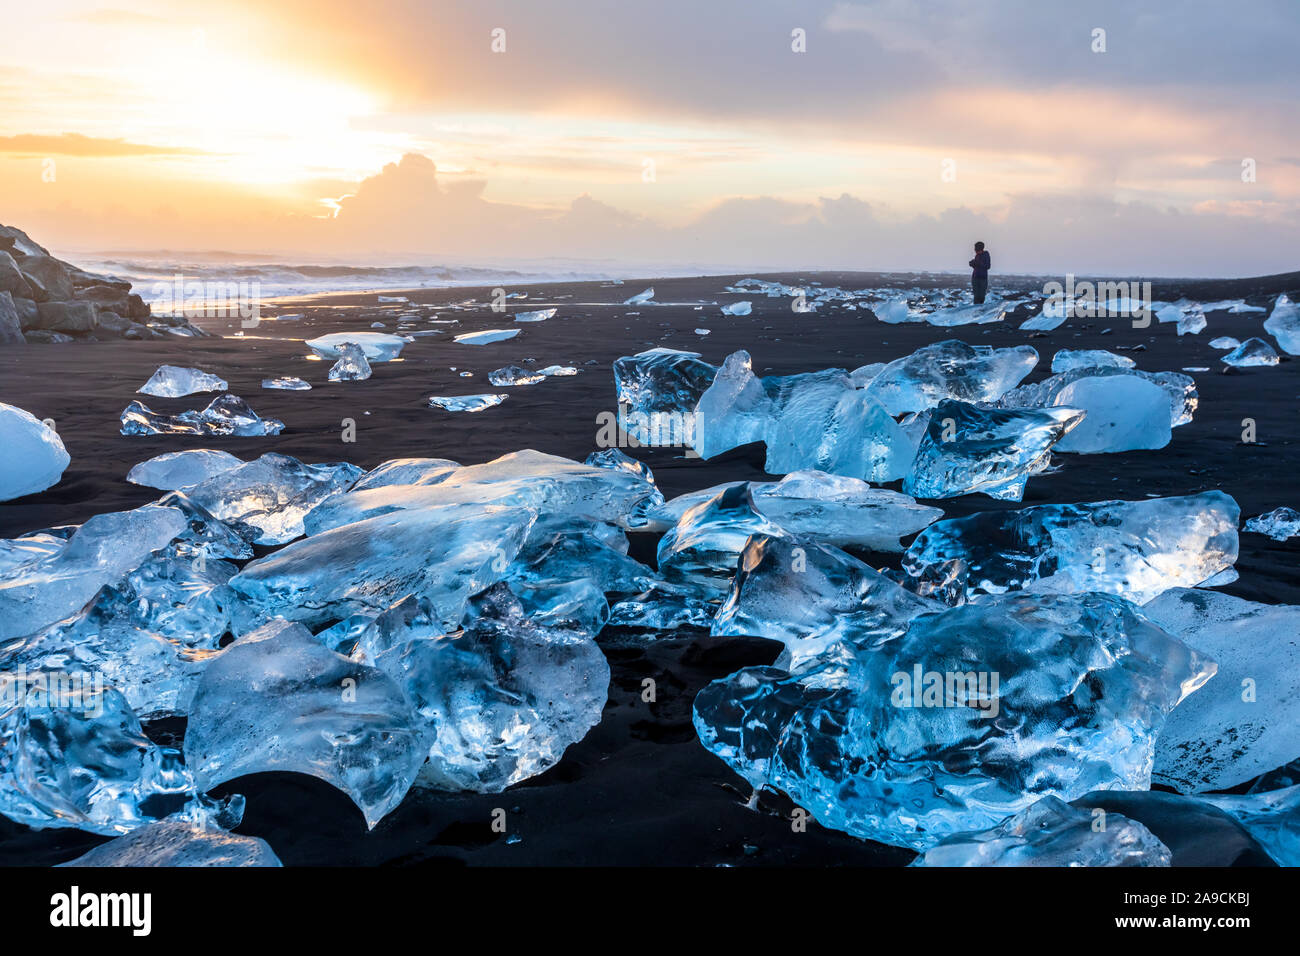 Diamond Beach in Iceland with blue icebergs melting on the black sand and ice glistening with sunrise sun light, tourist looking at beautiful arctic n Stock Photo